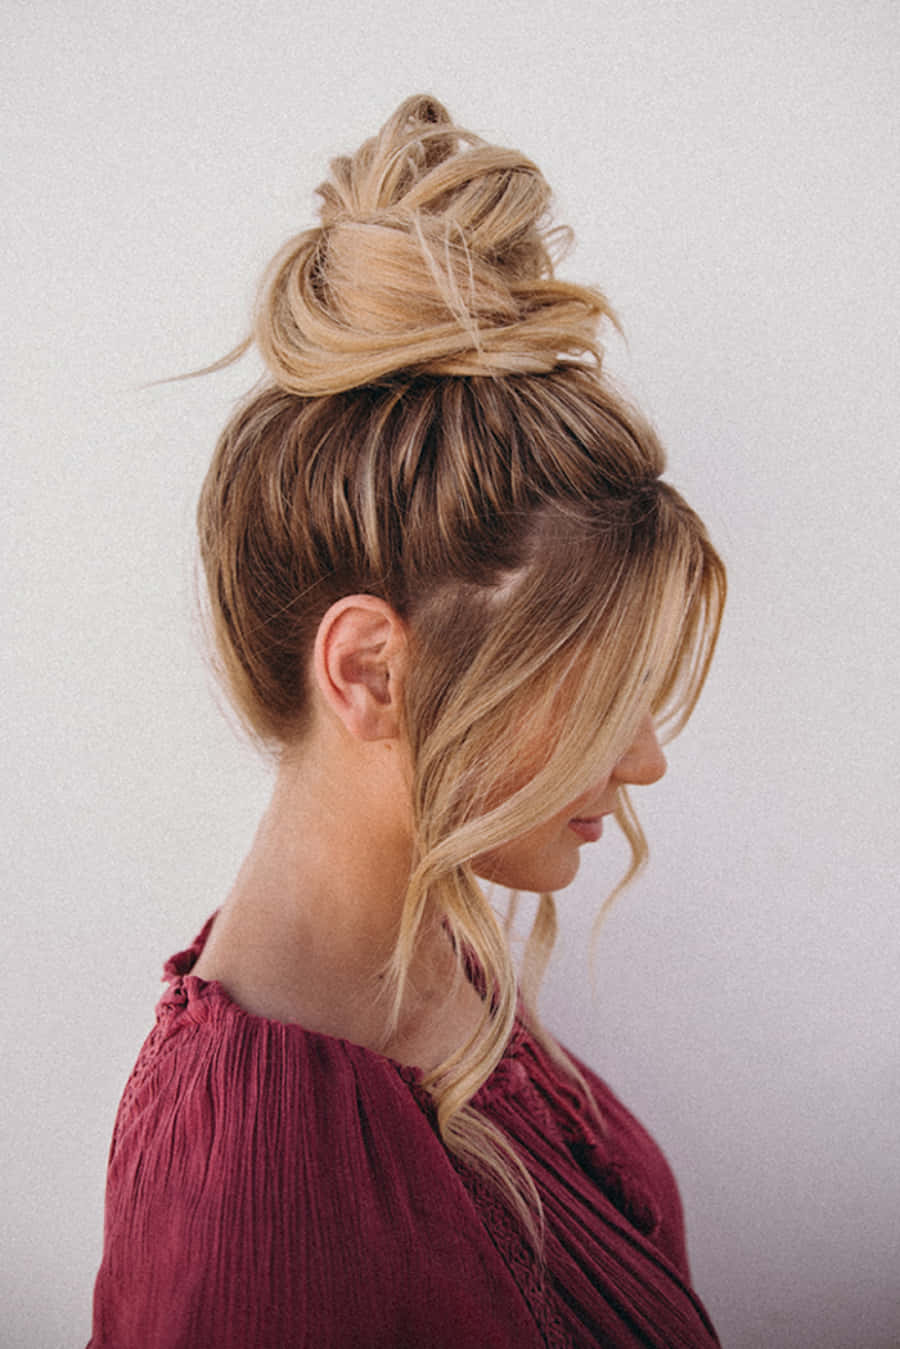 A Showcase of Adorable Cute Hairstyles